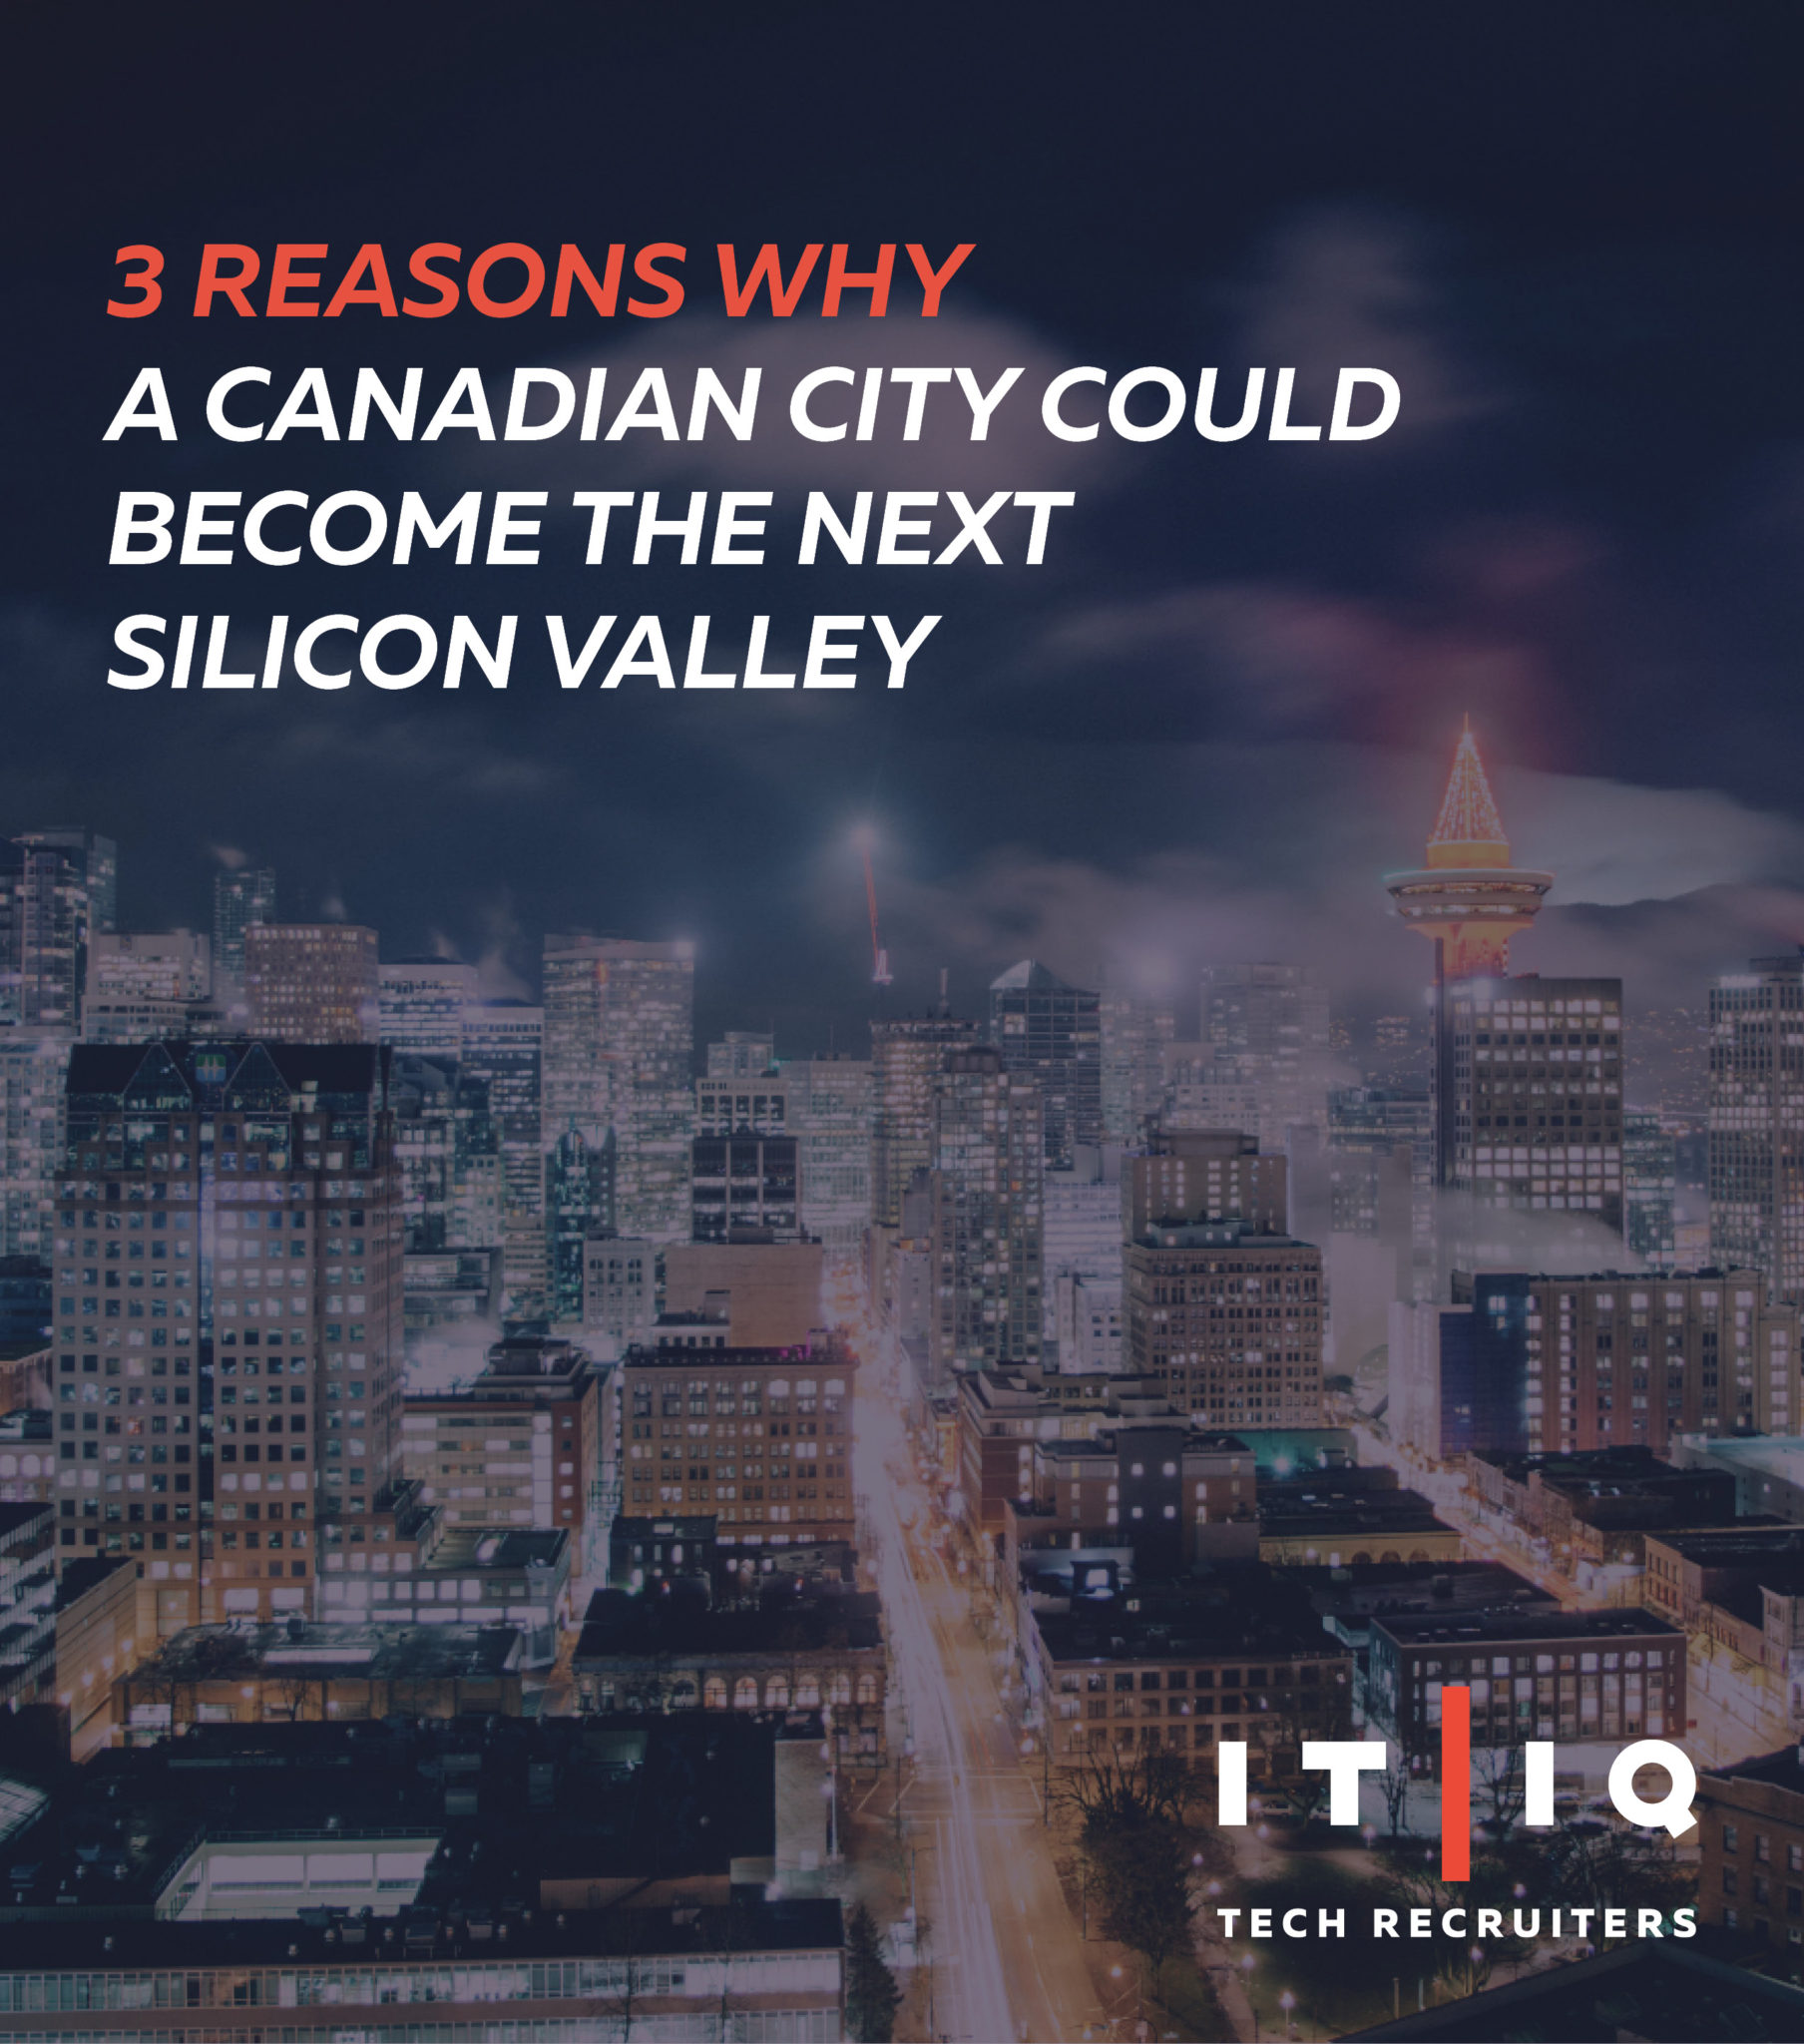 IT/IQ Tech Recruiters " 3 reasons why a Canadian city could become the next Silicon Valley " graphic, photo background of Toronto, Canada